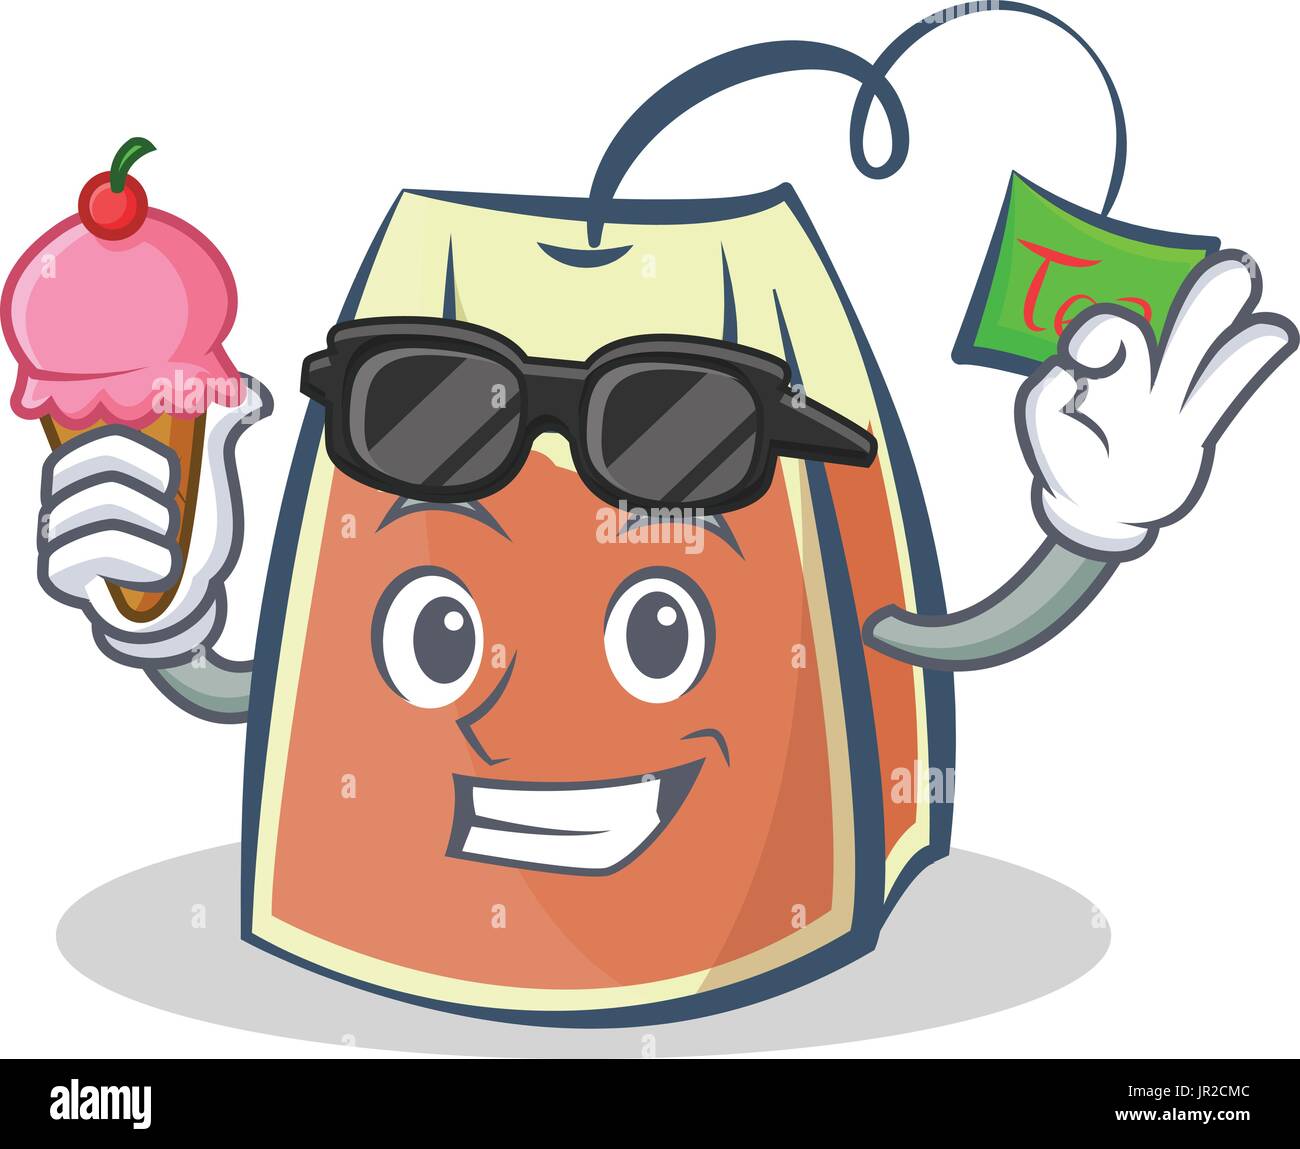 Royalty-Free (RF) Clipart of Tea Bags, Illustrations, Vector Graphics #1